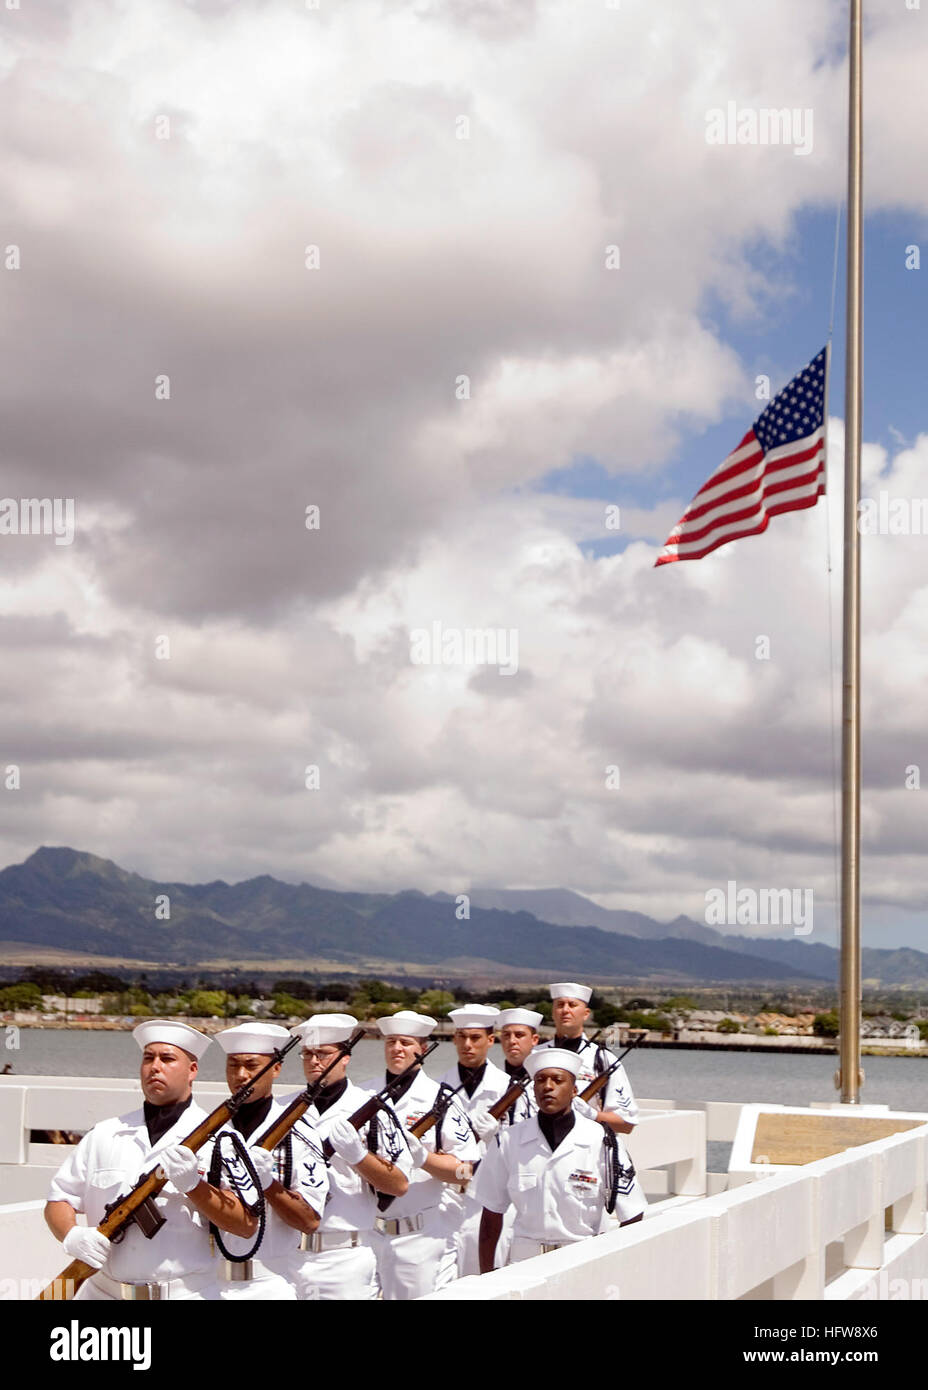 080611-N-0995C-001 FORD ISLAND, Hawaii (June11, 2008) Members of the Navy ceremonial guards post after an interment ceremony at the USS Utah Memorial on Ford Island at Naval Station Pearl Harbor. The ceremony was held to honor Petty Officer First Class Jimmy Oberto, a crewmember of the Florida-class dreadnaught battleship USS Utah (BB 31/AG 16) during the Pearl Harbor attack. U.S. Navy photo by Mass Communication Specialist Third Class Eric J. Cutright (Released) US Navy 080611-N-0995C-001 Members of the Navy ceremonial guards post after an interment ceremony at the USS Utah Memorial on Ford I Stock Photo